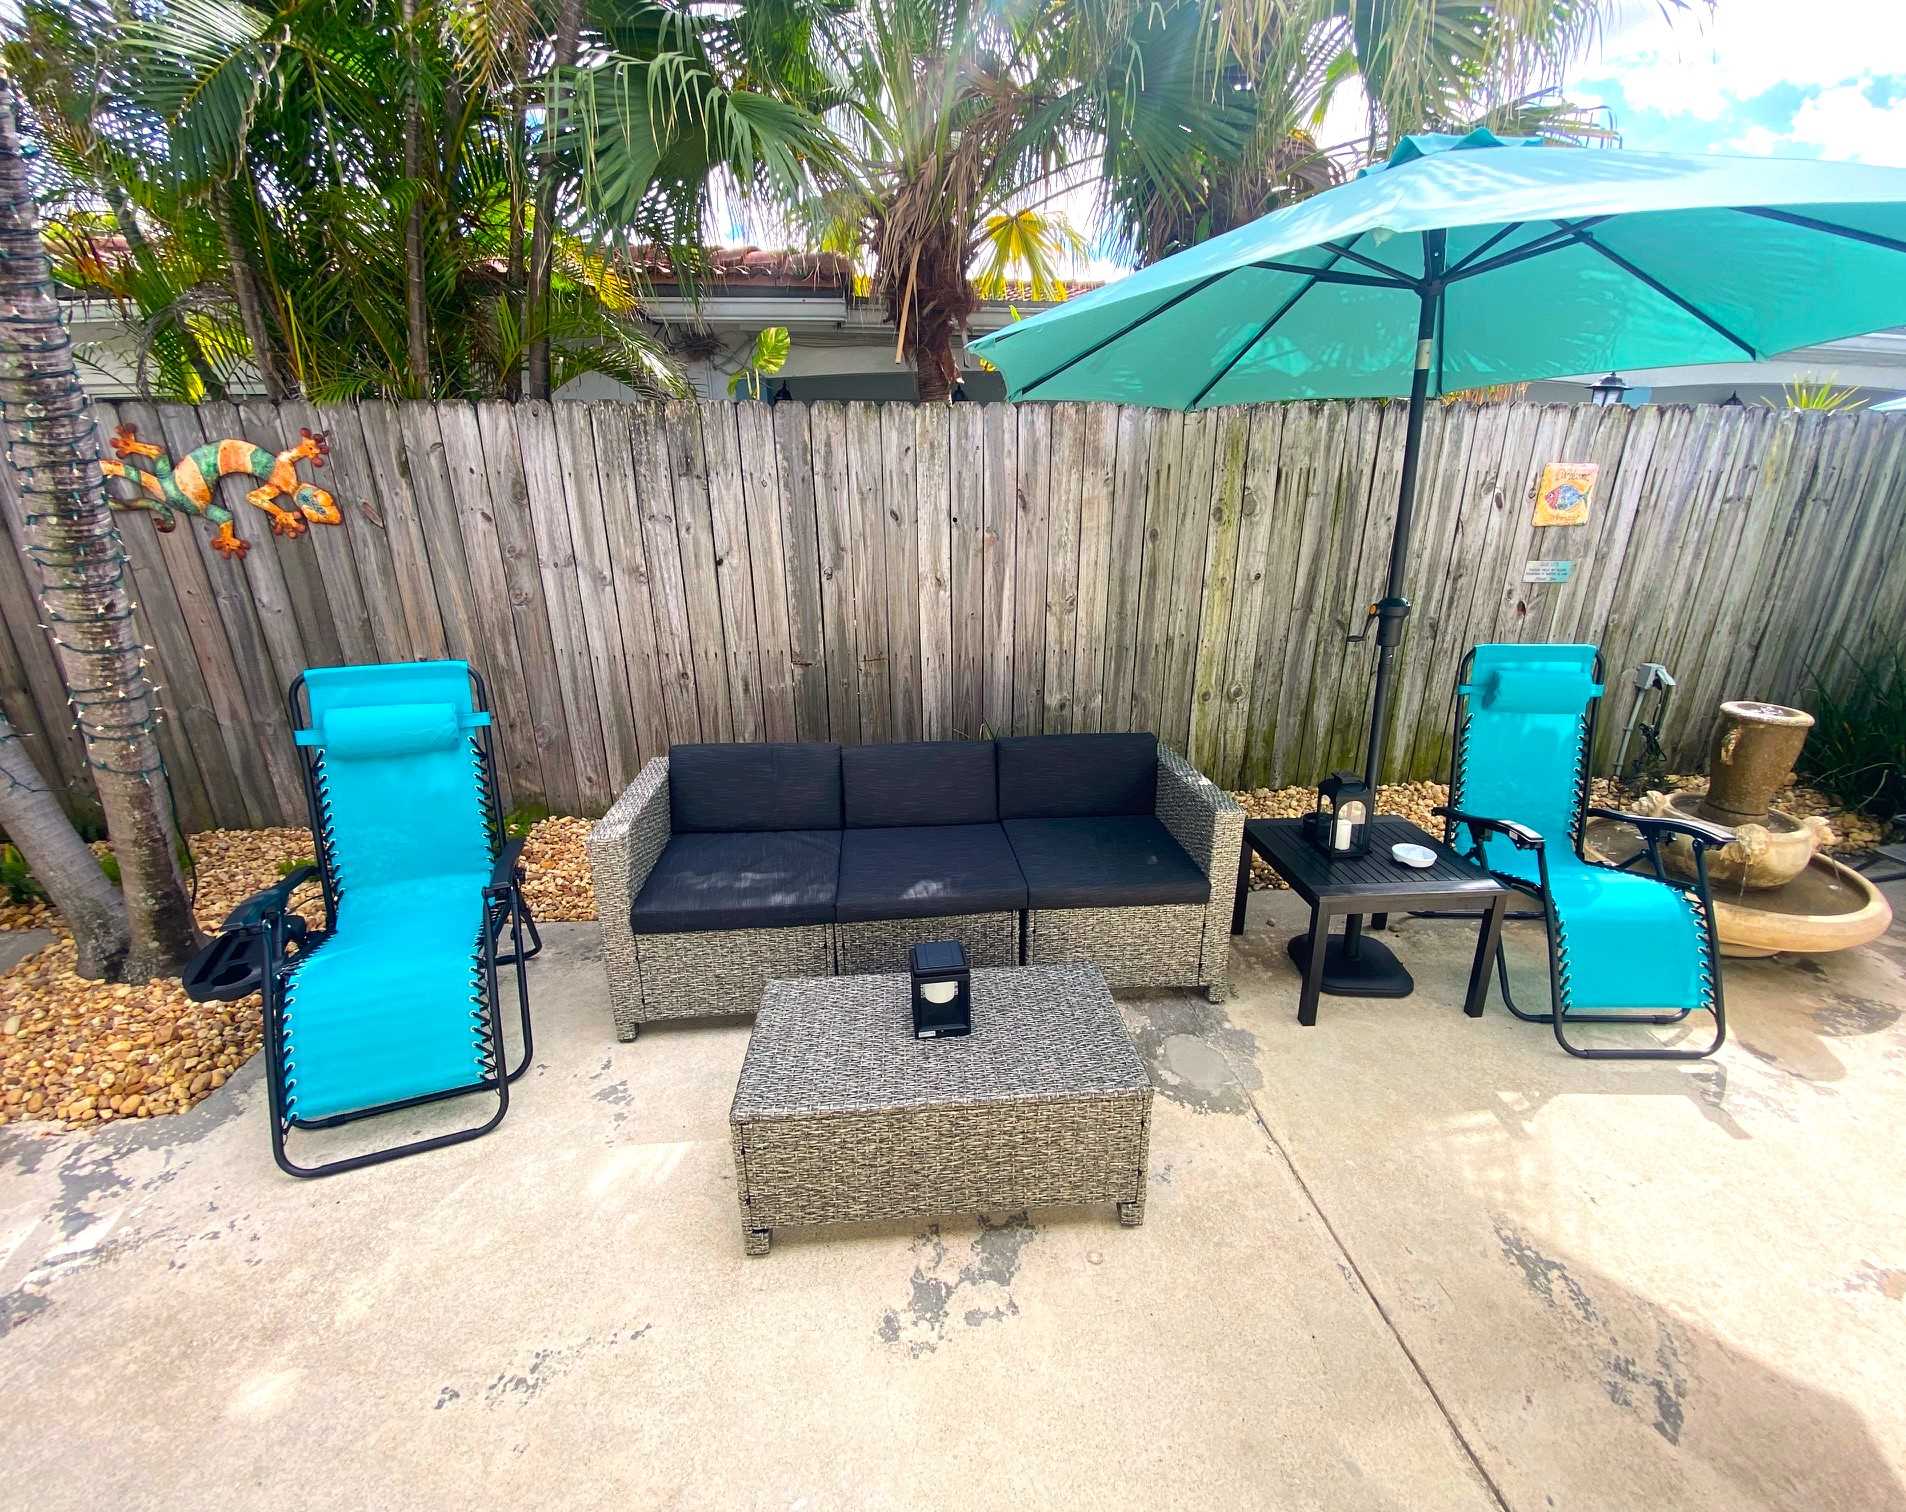 The patio furniture has just been updated.